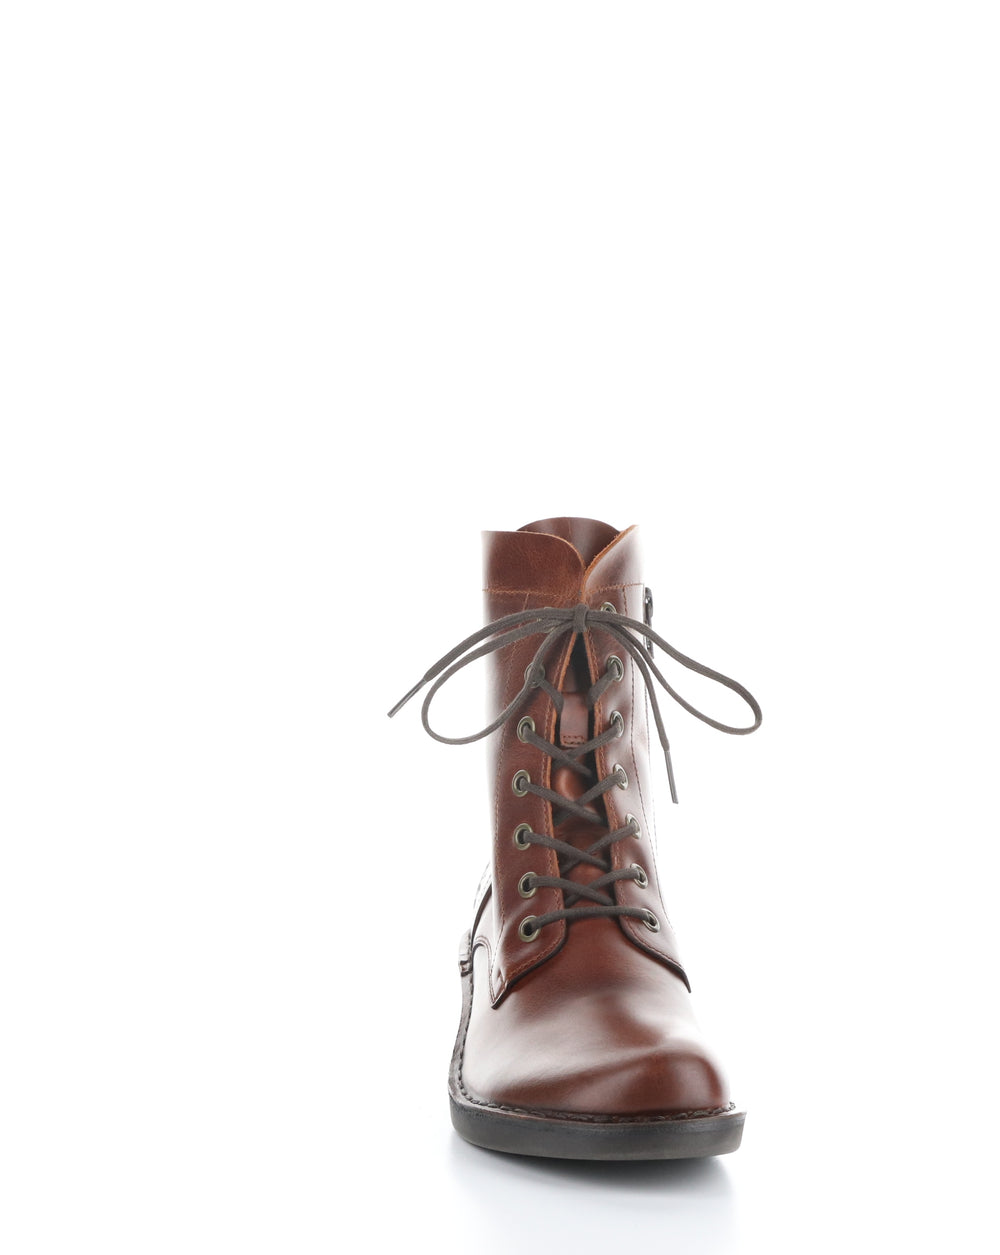 MILU044FLY 011 BRICK Lace-up Boots